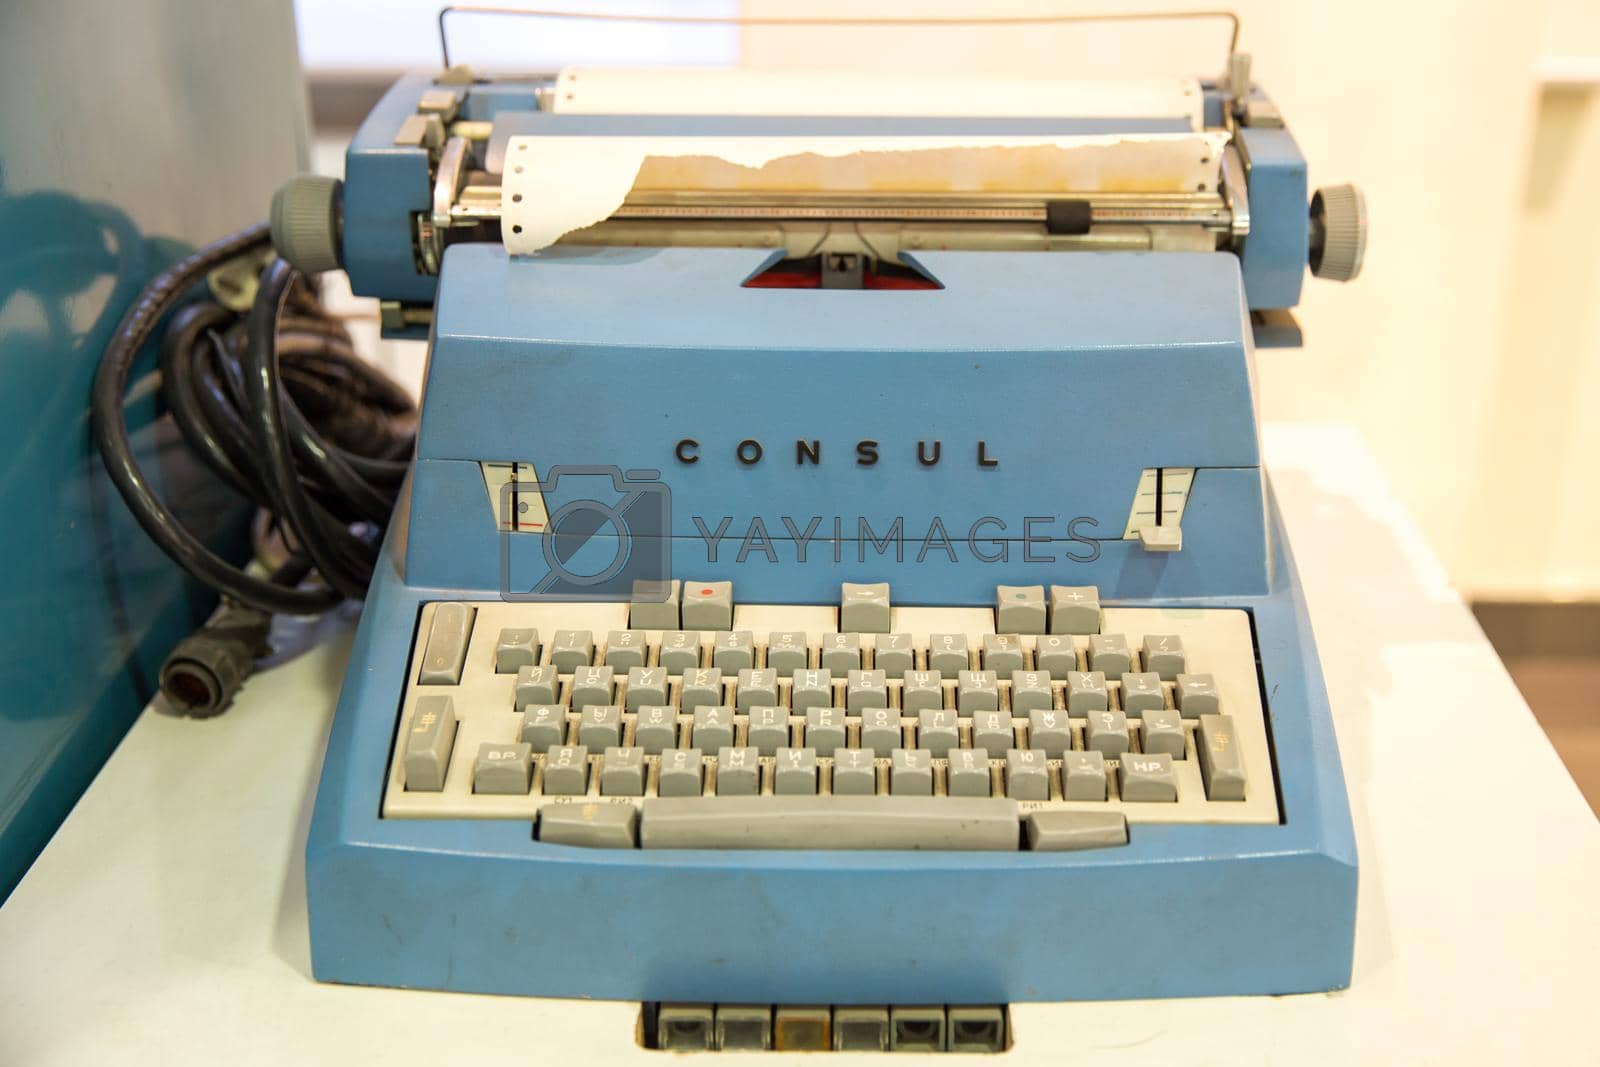 Moscow, Russia - November 20, 2013: Consul Typewriter by Zbrojovka Brno, Czechoslovakia which started manufacturing typewriters in 1932. The name CONSUL was first used in 1953